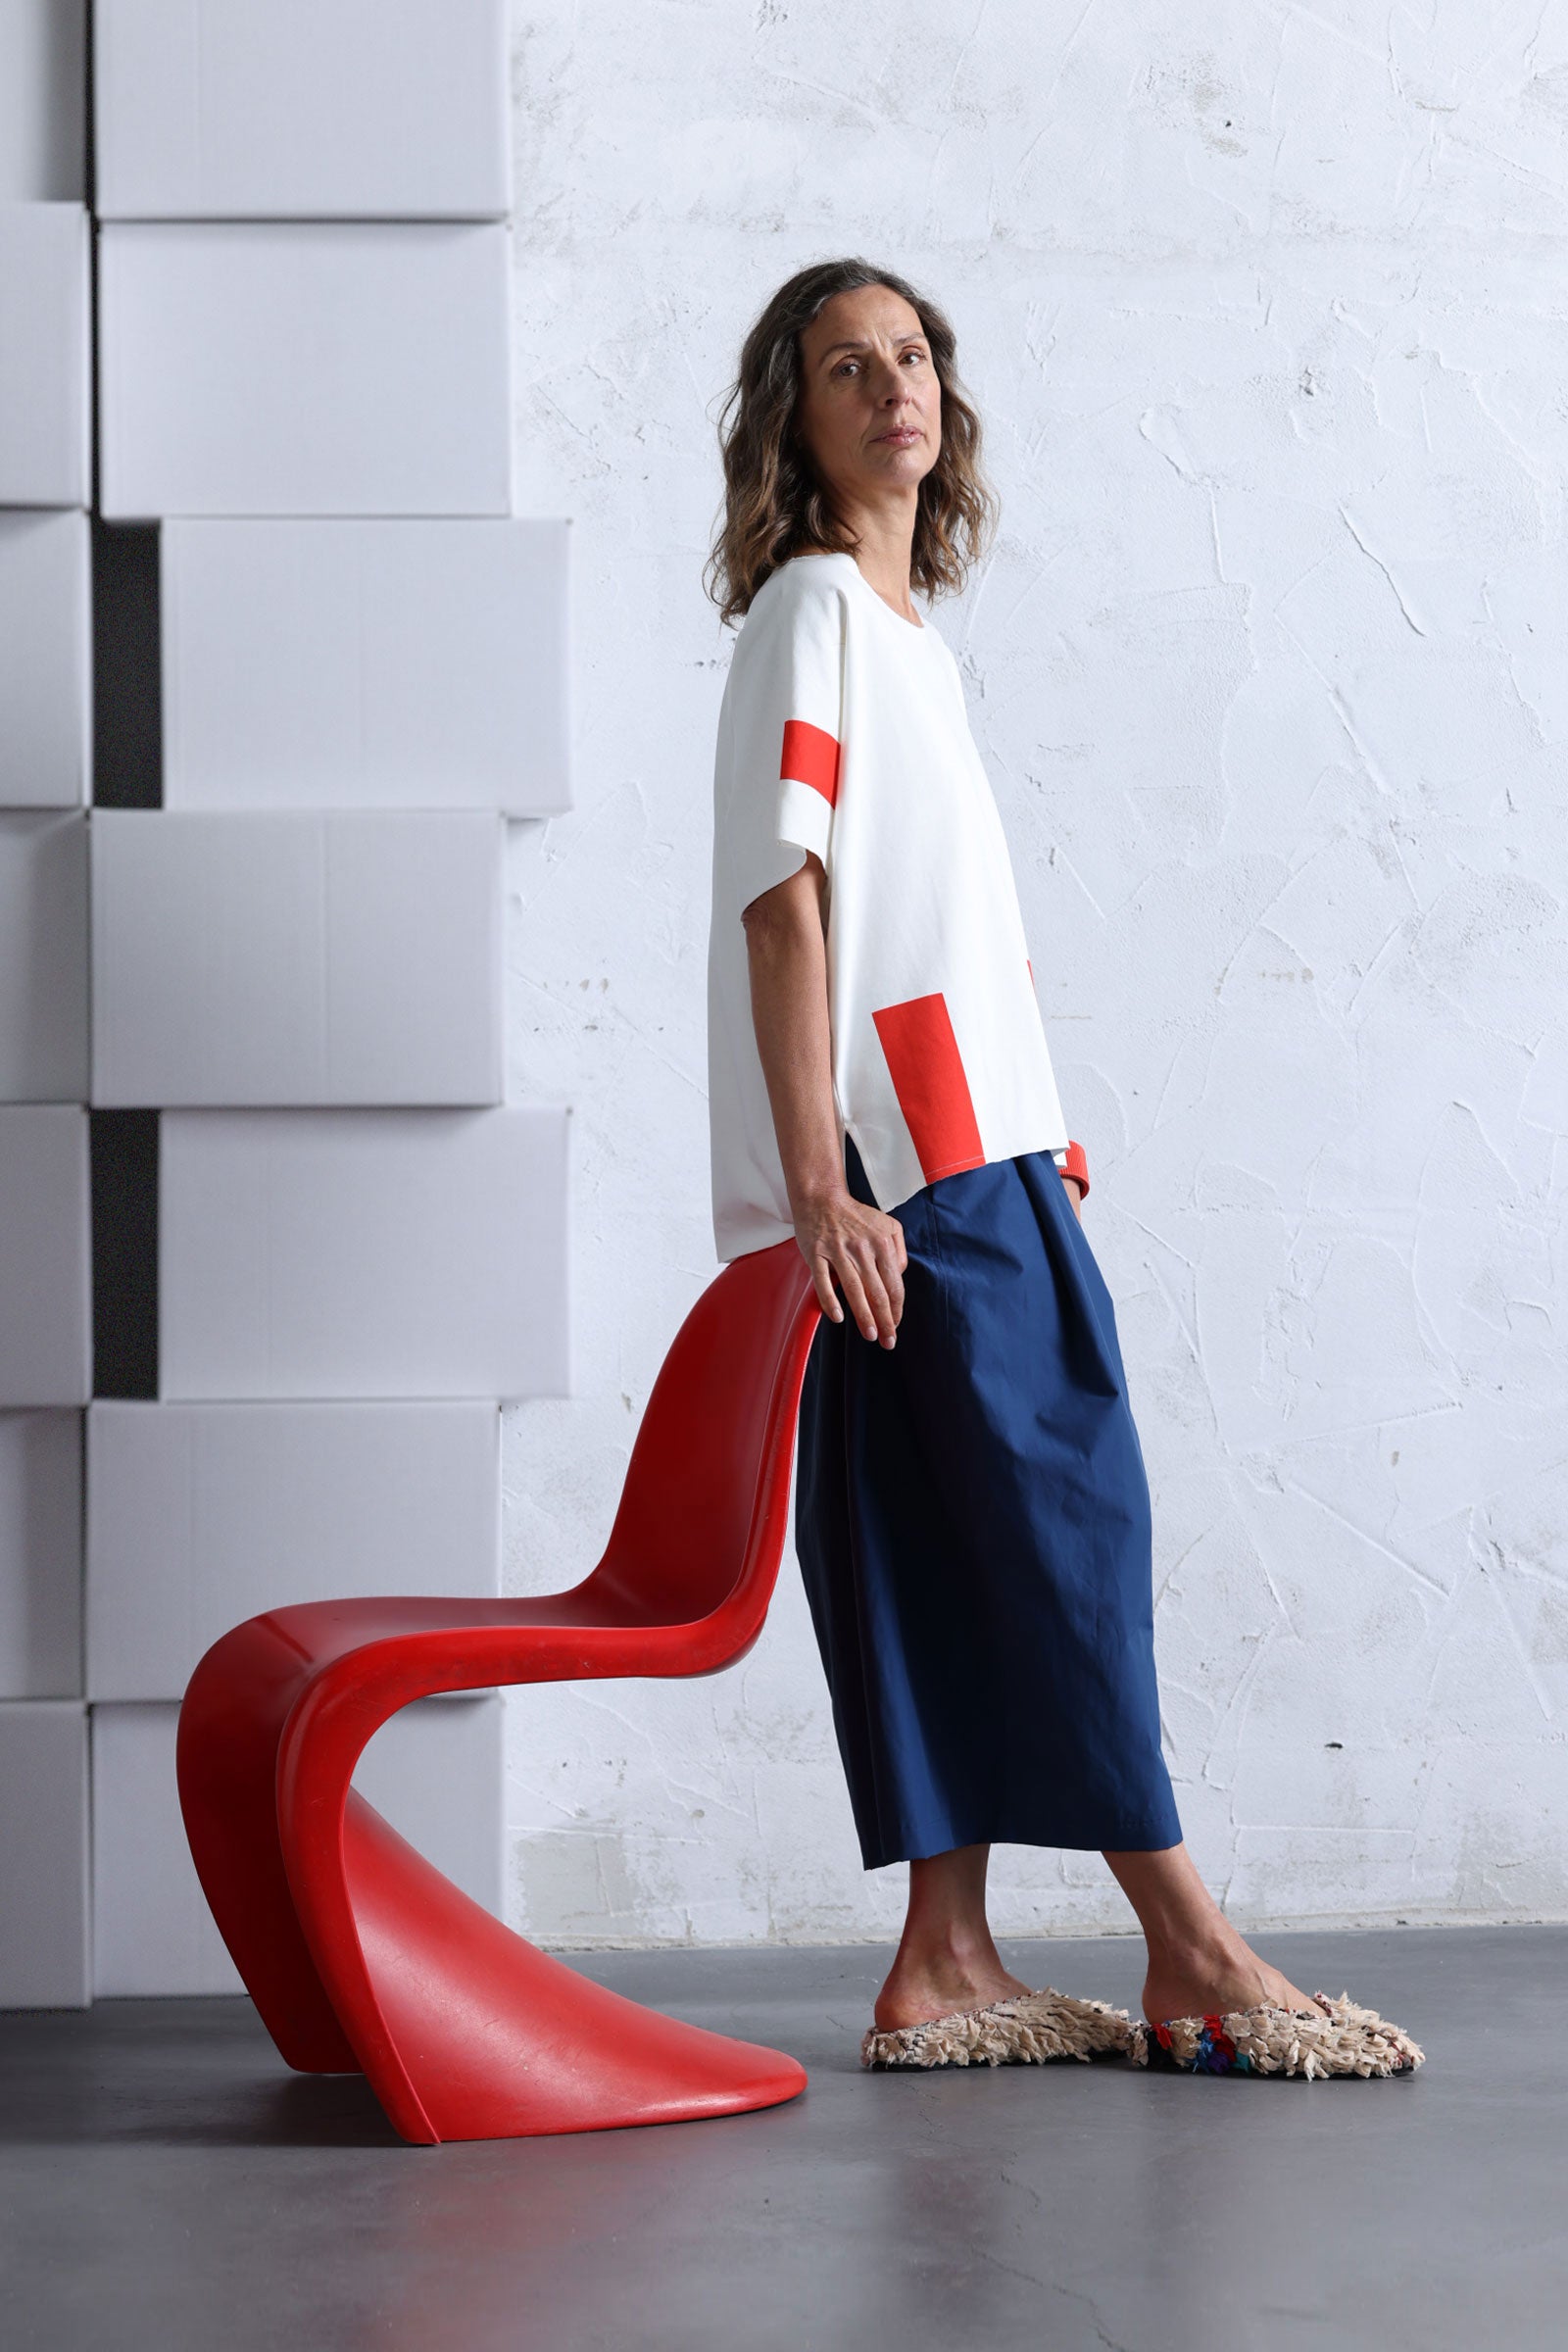 Off-White T-Shirt with red rectangles, model wearing blues pants standing next to a red Panton chair